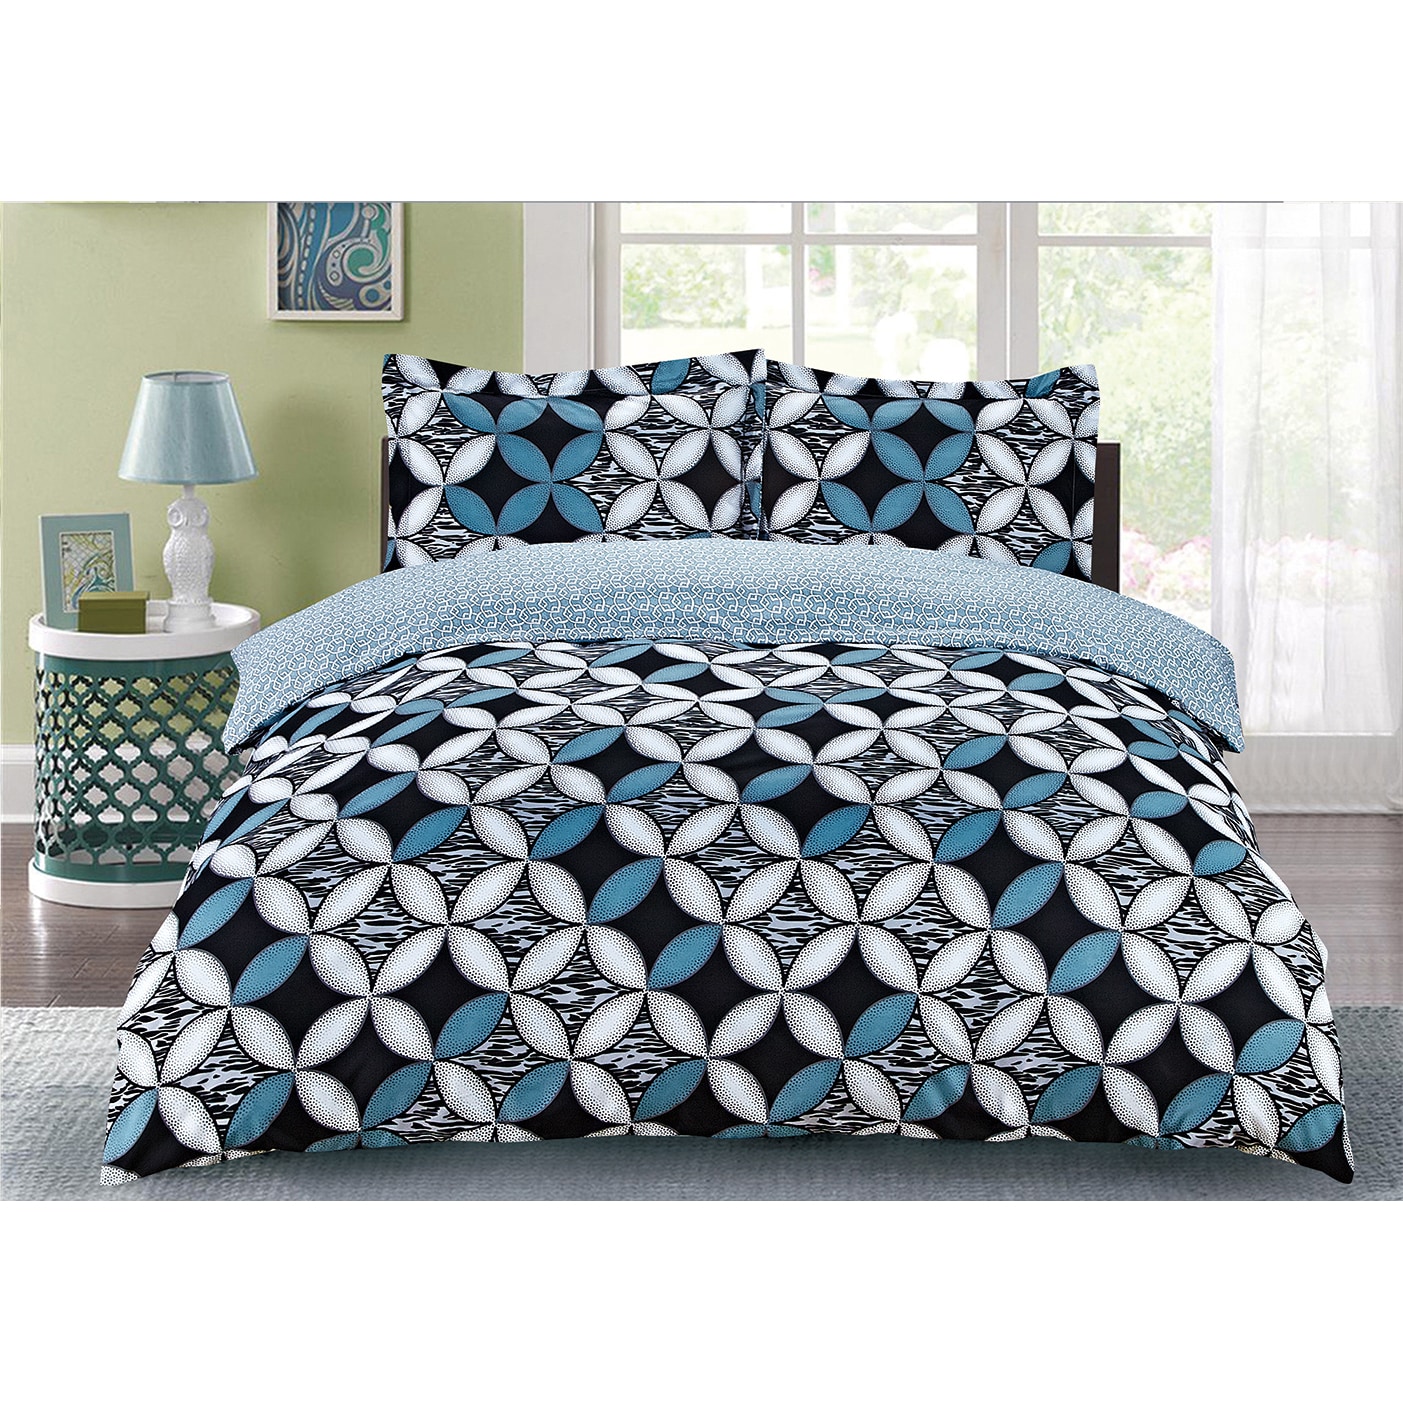 Nettie Teal 3 Piece Printed Duvet Cover Set Free Shipping On